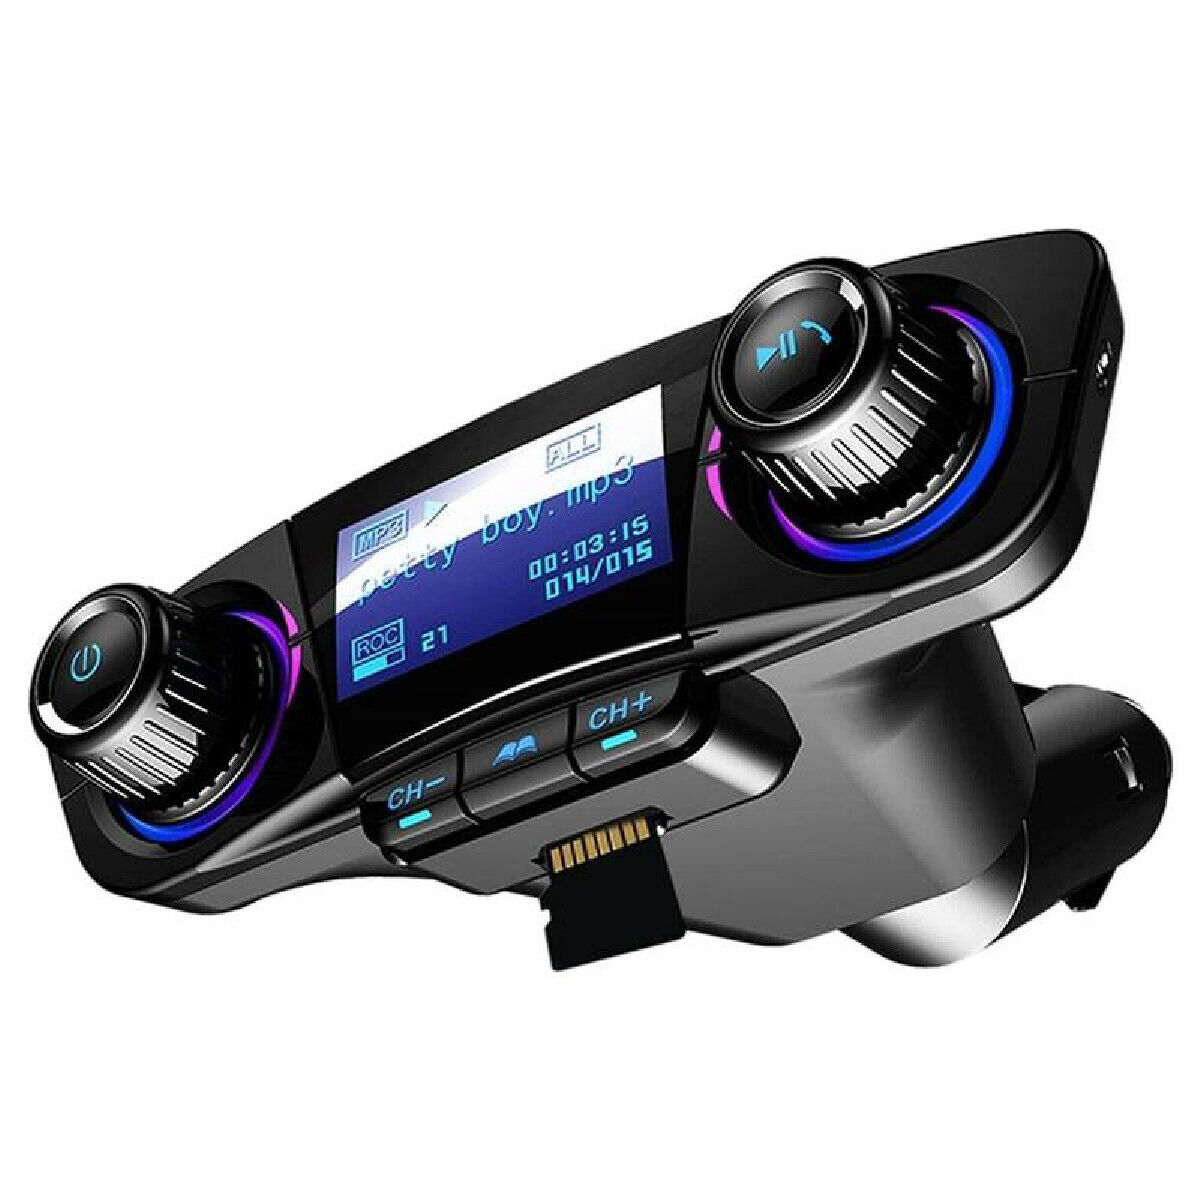 Wireless Bluetooth FM Transmitter Car Stereo Audio MP3 AUX Adapter USB Charger